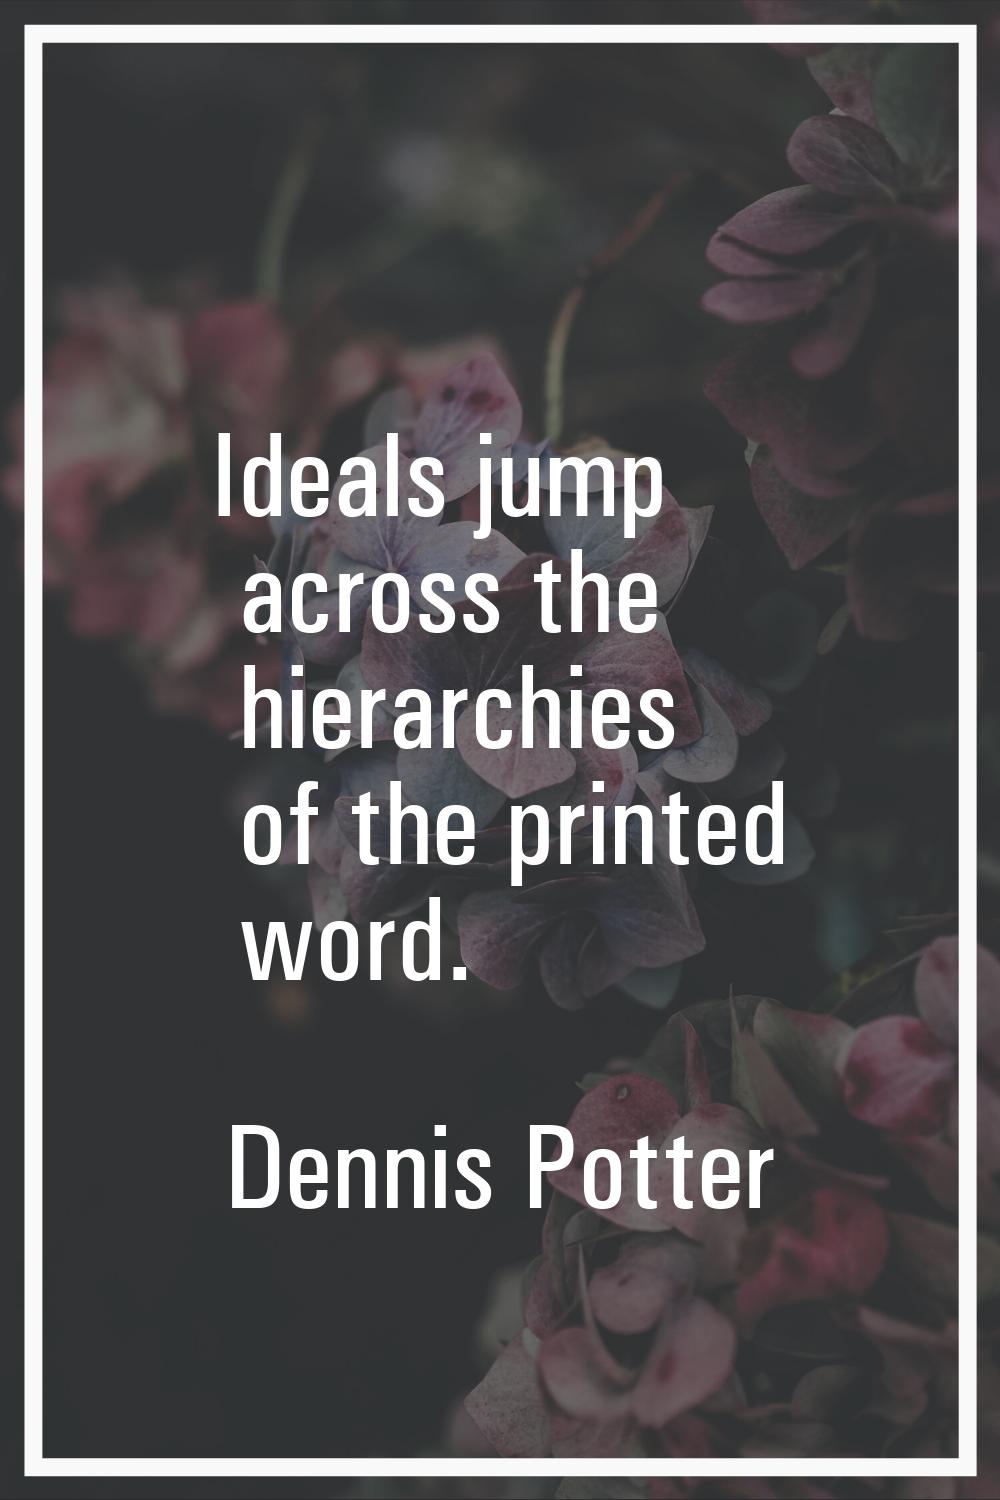 Ideals jump across the hierarchies of the printed word.